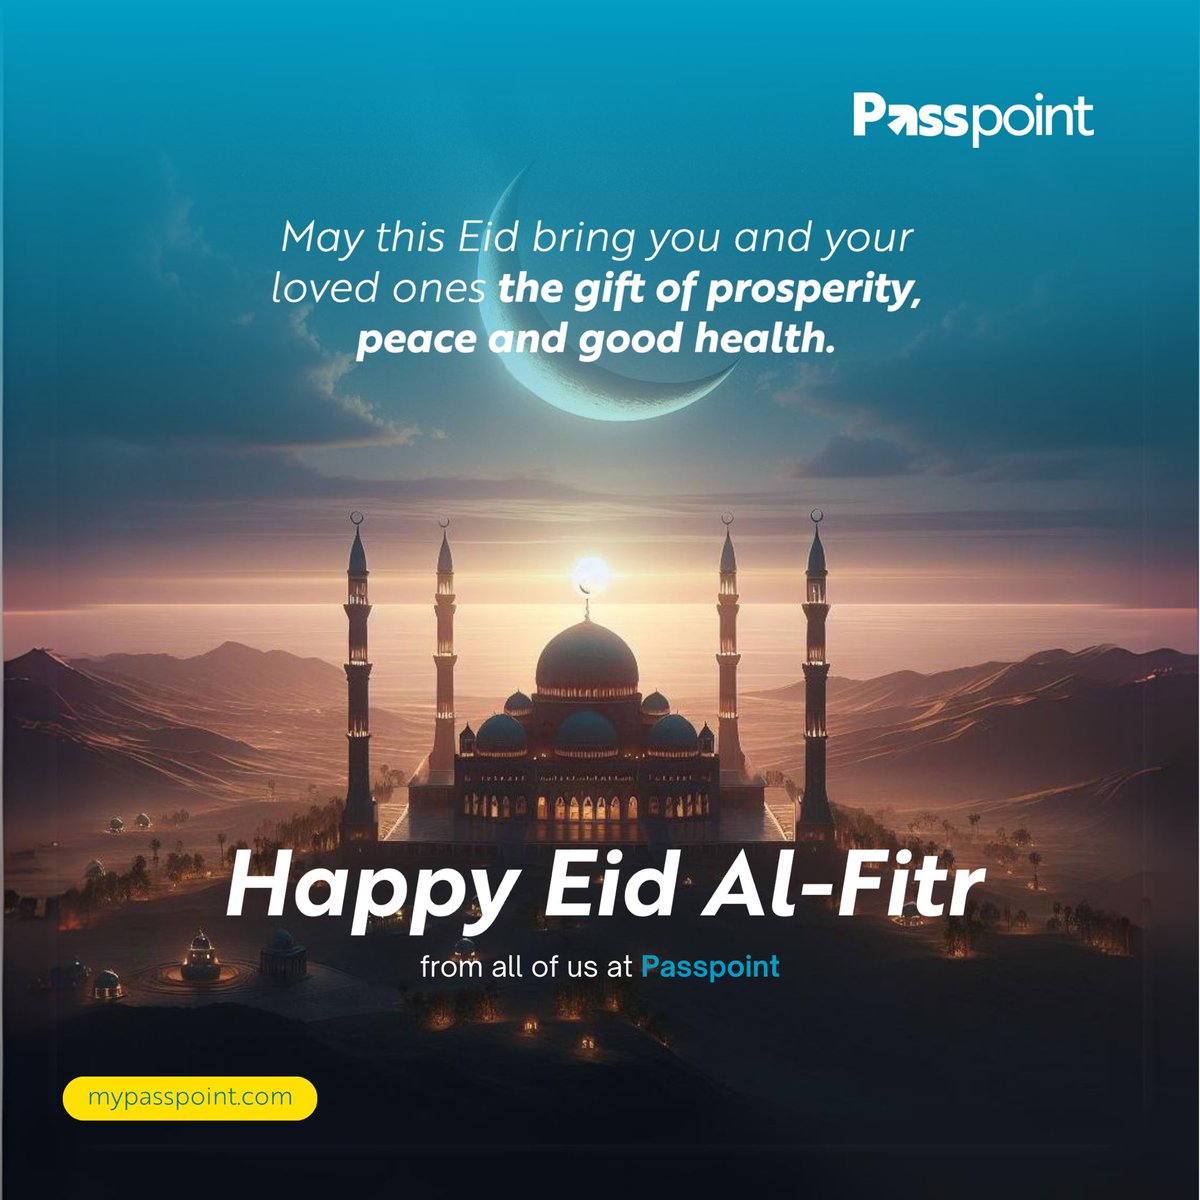 Eid Mubarak from All of us at Passpoint.